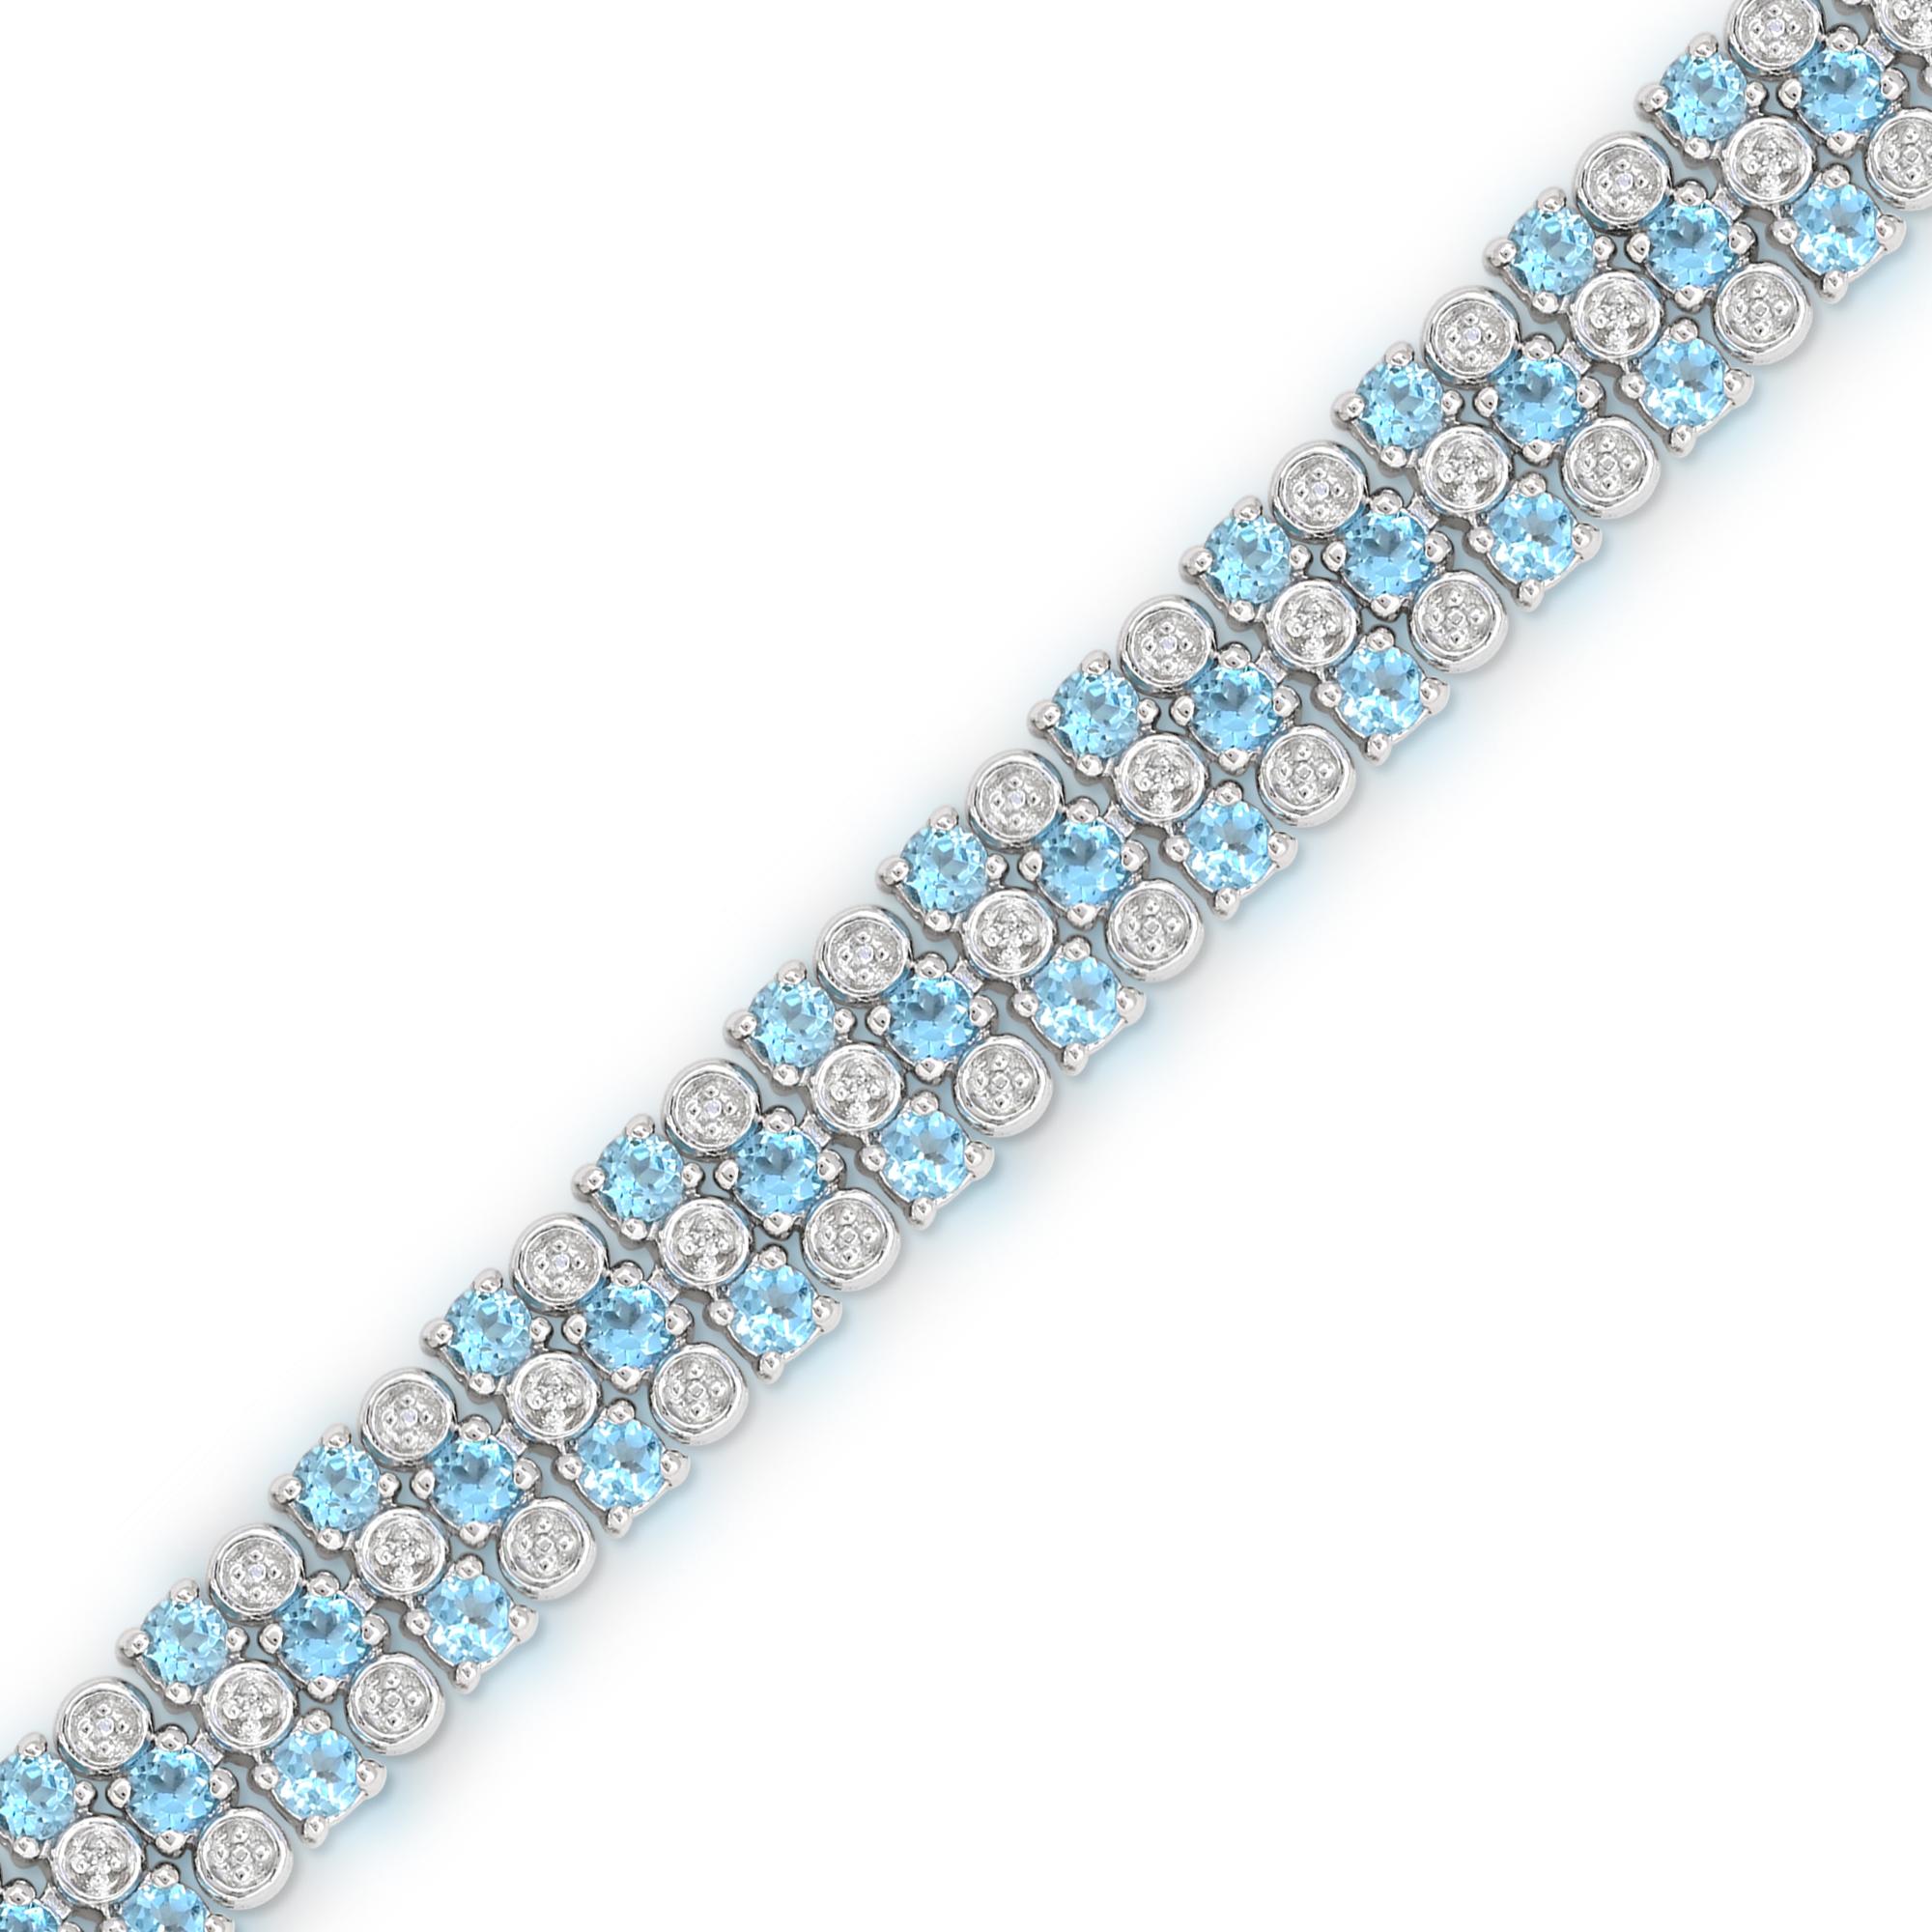 This elegant sterling silver bracelet features 72 Swiss blue topaz accented by 6 pieces of single-cut round white diamonds prong and bezel set in sterling silver spaced repeatedly. Designed for both comfort and style, this bracelet is secured with a